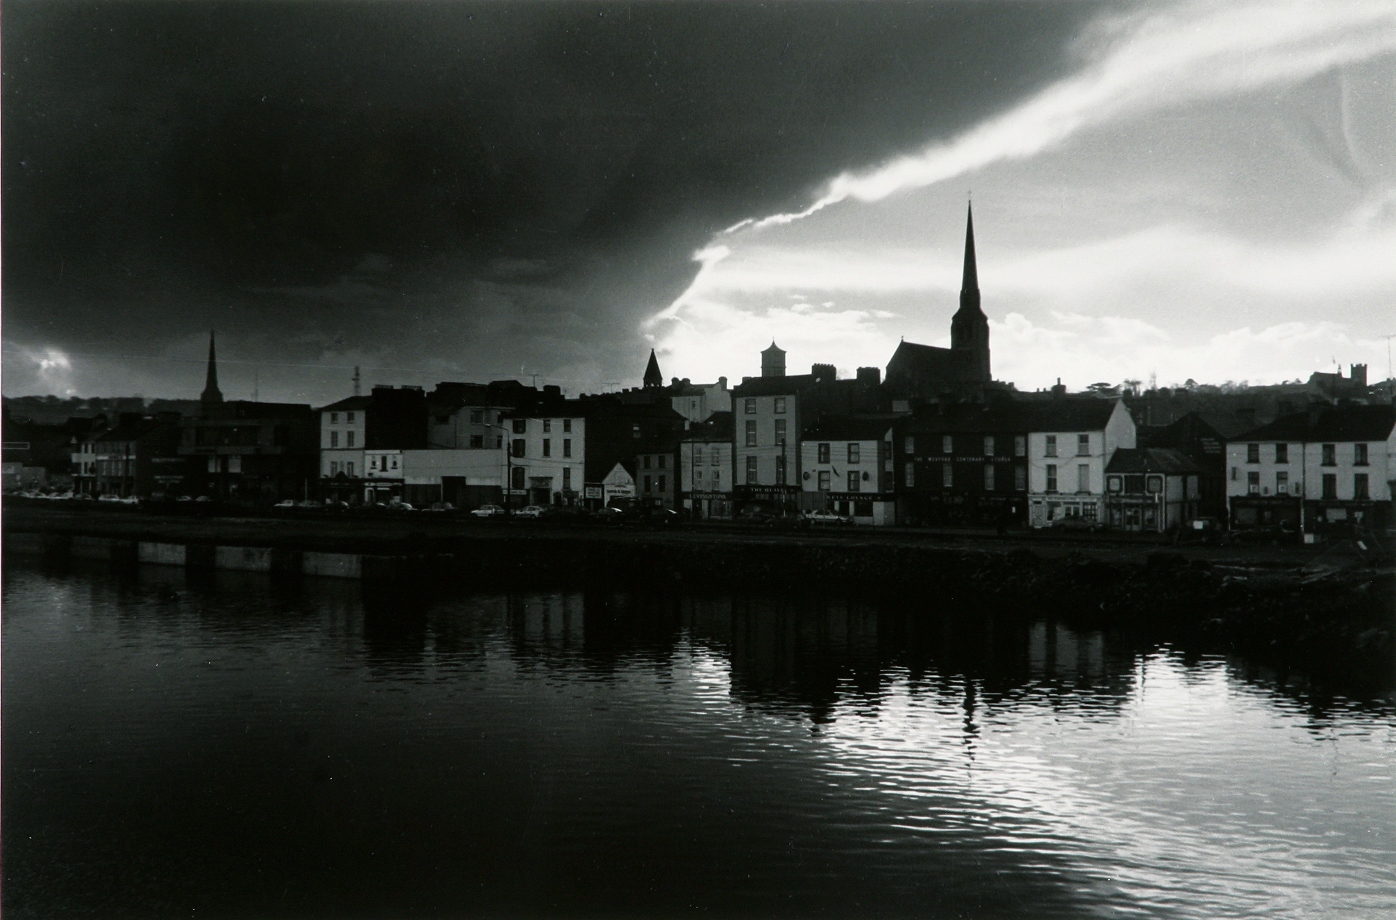 Wexford Town Evening by Padraig Grant